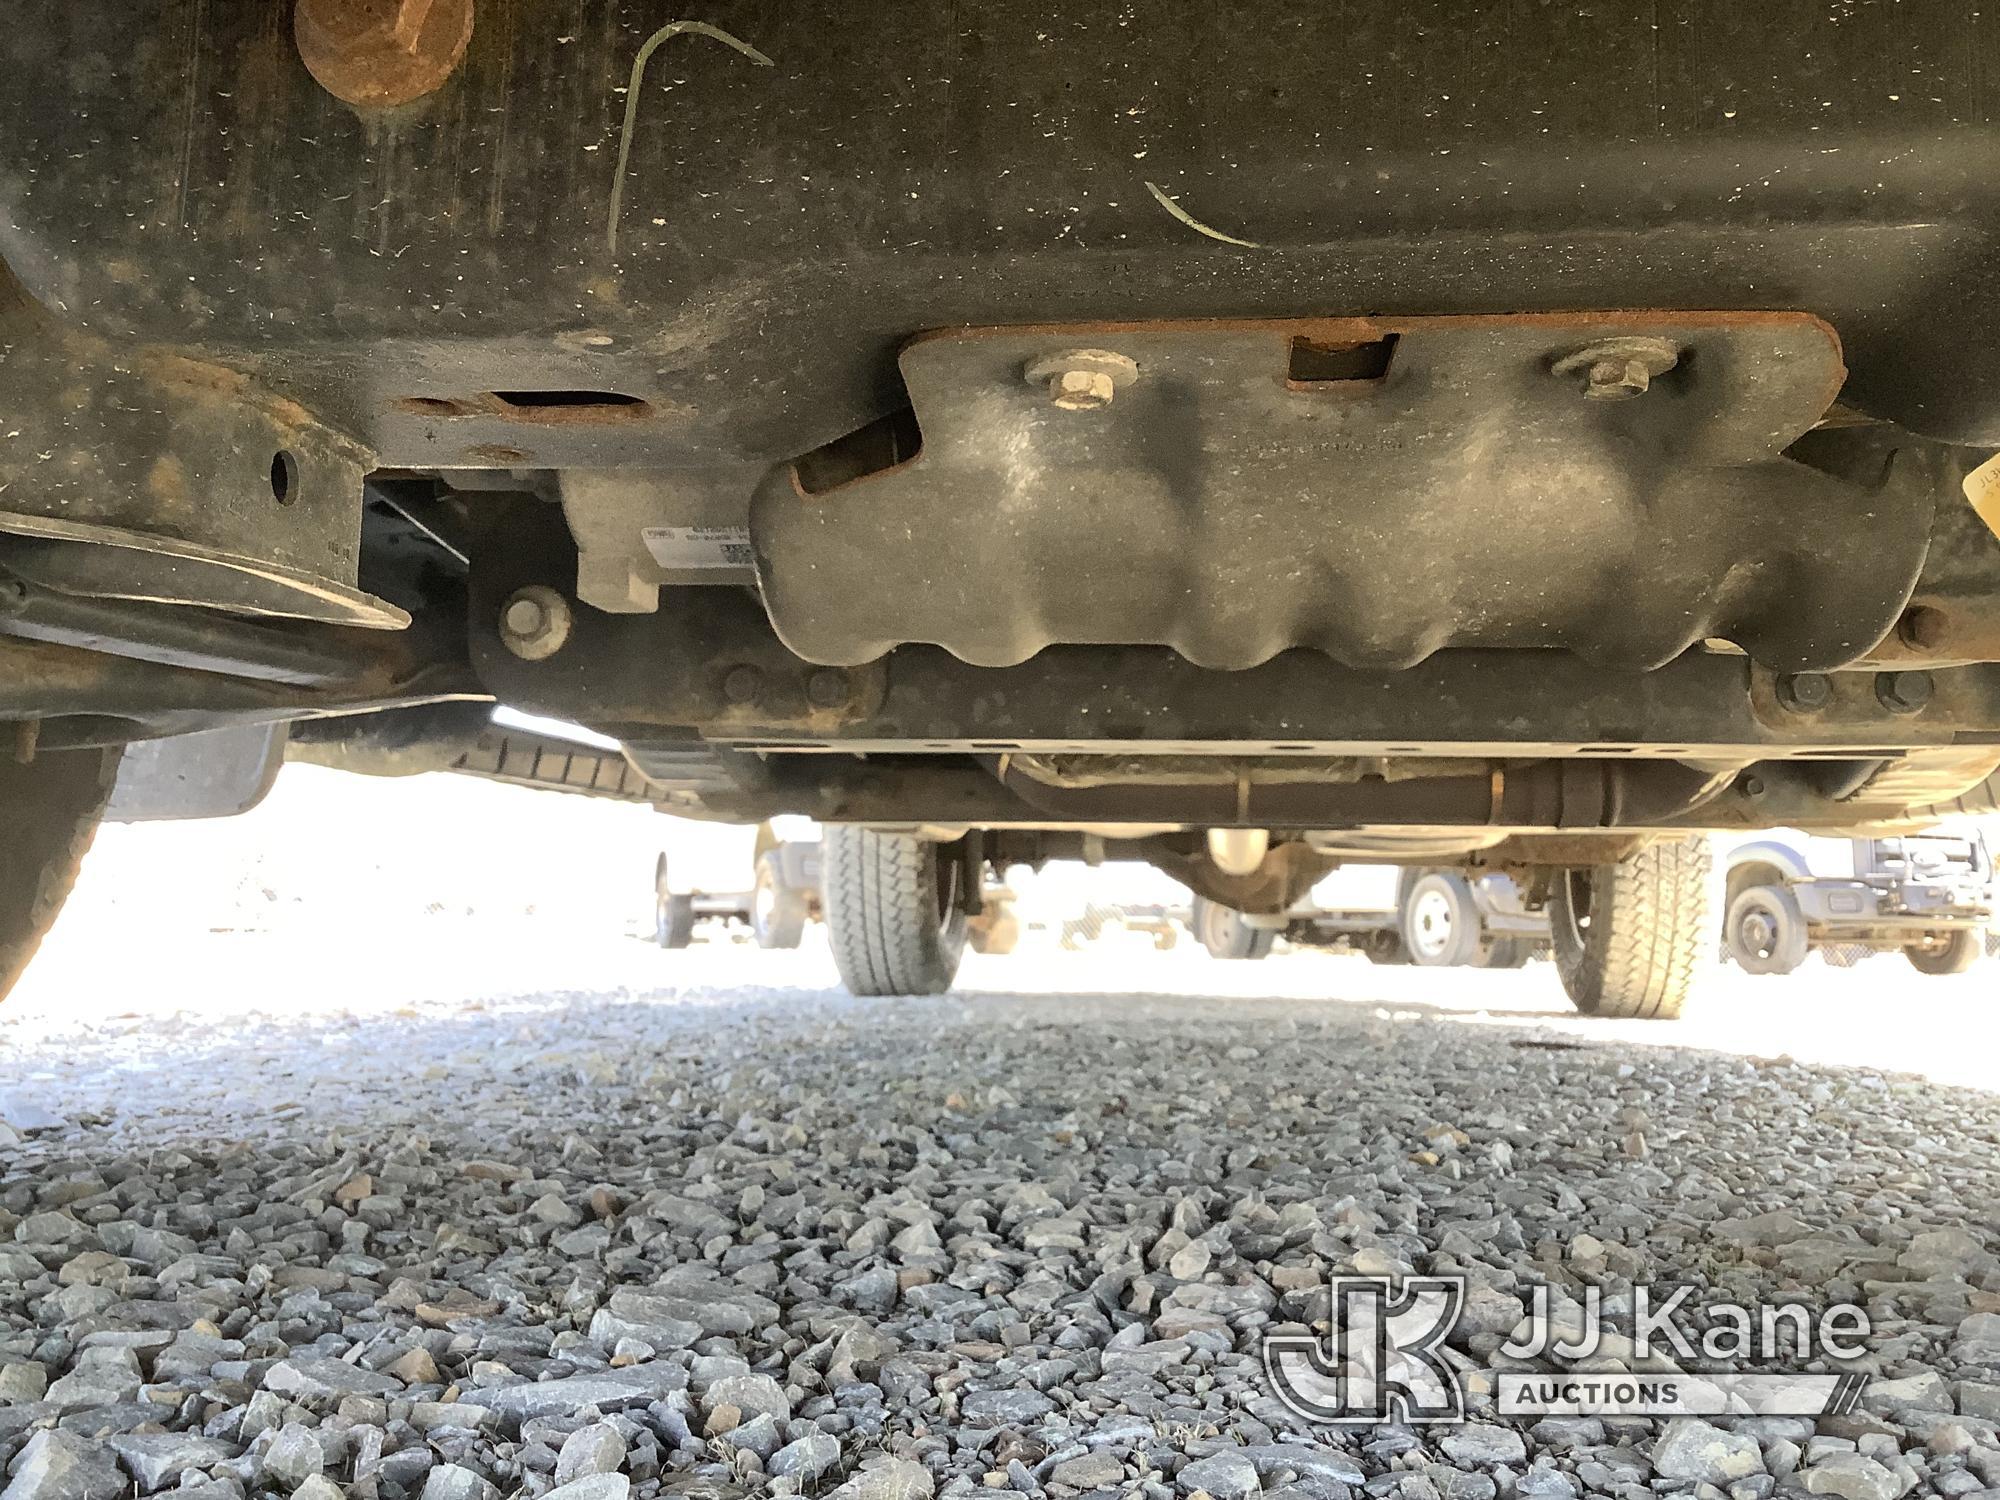 (Smock, PA) 2018 Ford F150 4x4 Extended-Cab Pickup Truck Runs & Moves, Rust Damage